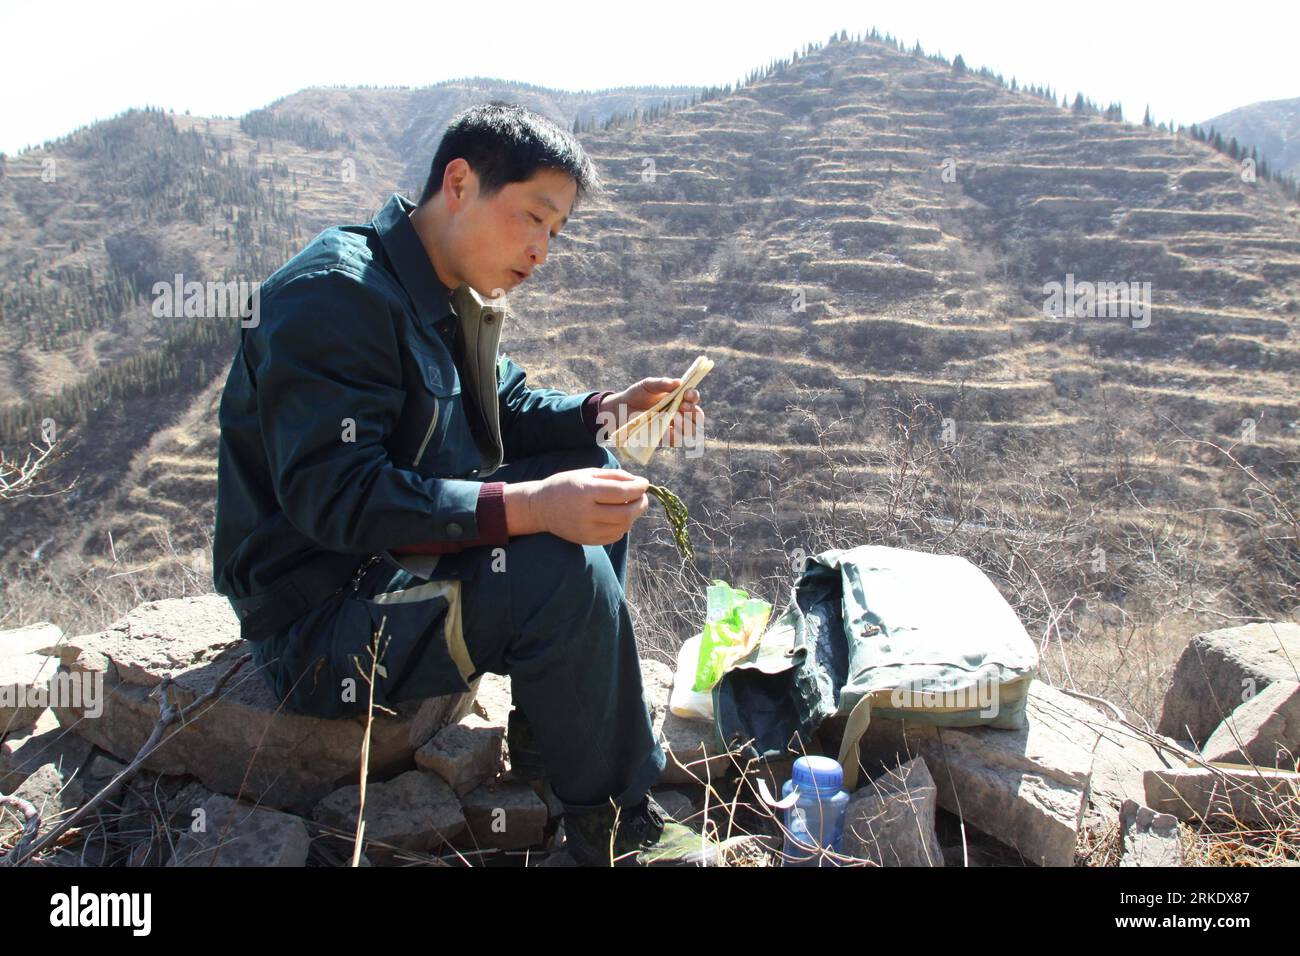 Bildnummer: 55014206  Datum: 09.03.2011  Copyright: imago/Xinhua (110311) -- QINGZHOU, March 11, 2011 (Xinhua) -- Postman Sun Jigang has lunch while delivering mails in Qingzhou, east China s Shandong Province, March 9, 2011. Sun walks on a 34-kilometer-long post path in the remote mountainous area every two days to deliver mails for 13 villages along the way. It has been five years since Sun started the job and he is the only postman serving on the path. (Xinhua/Sun Shubao) (hdt)  CHINA-SHANDONG-SUN JIGANG-POSTMAN (CN) PUBLICATIONxNOTxINxCHN Gesellschaft Arbeitswelten Post Briefträger CHN kur Stock Photo